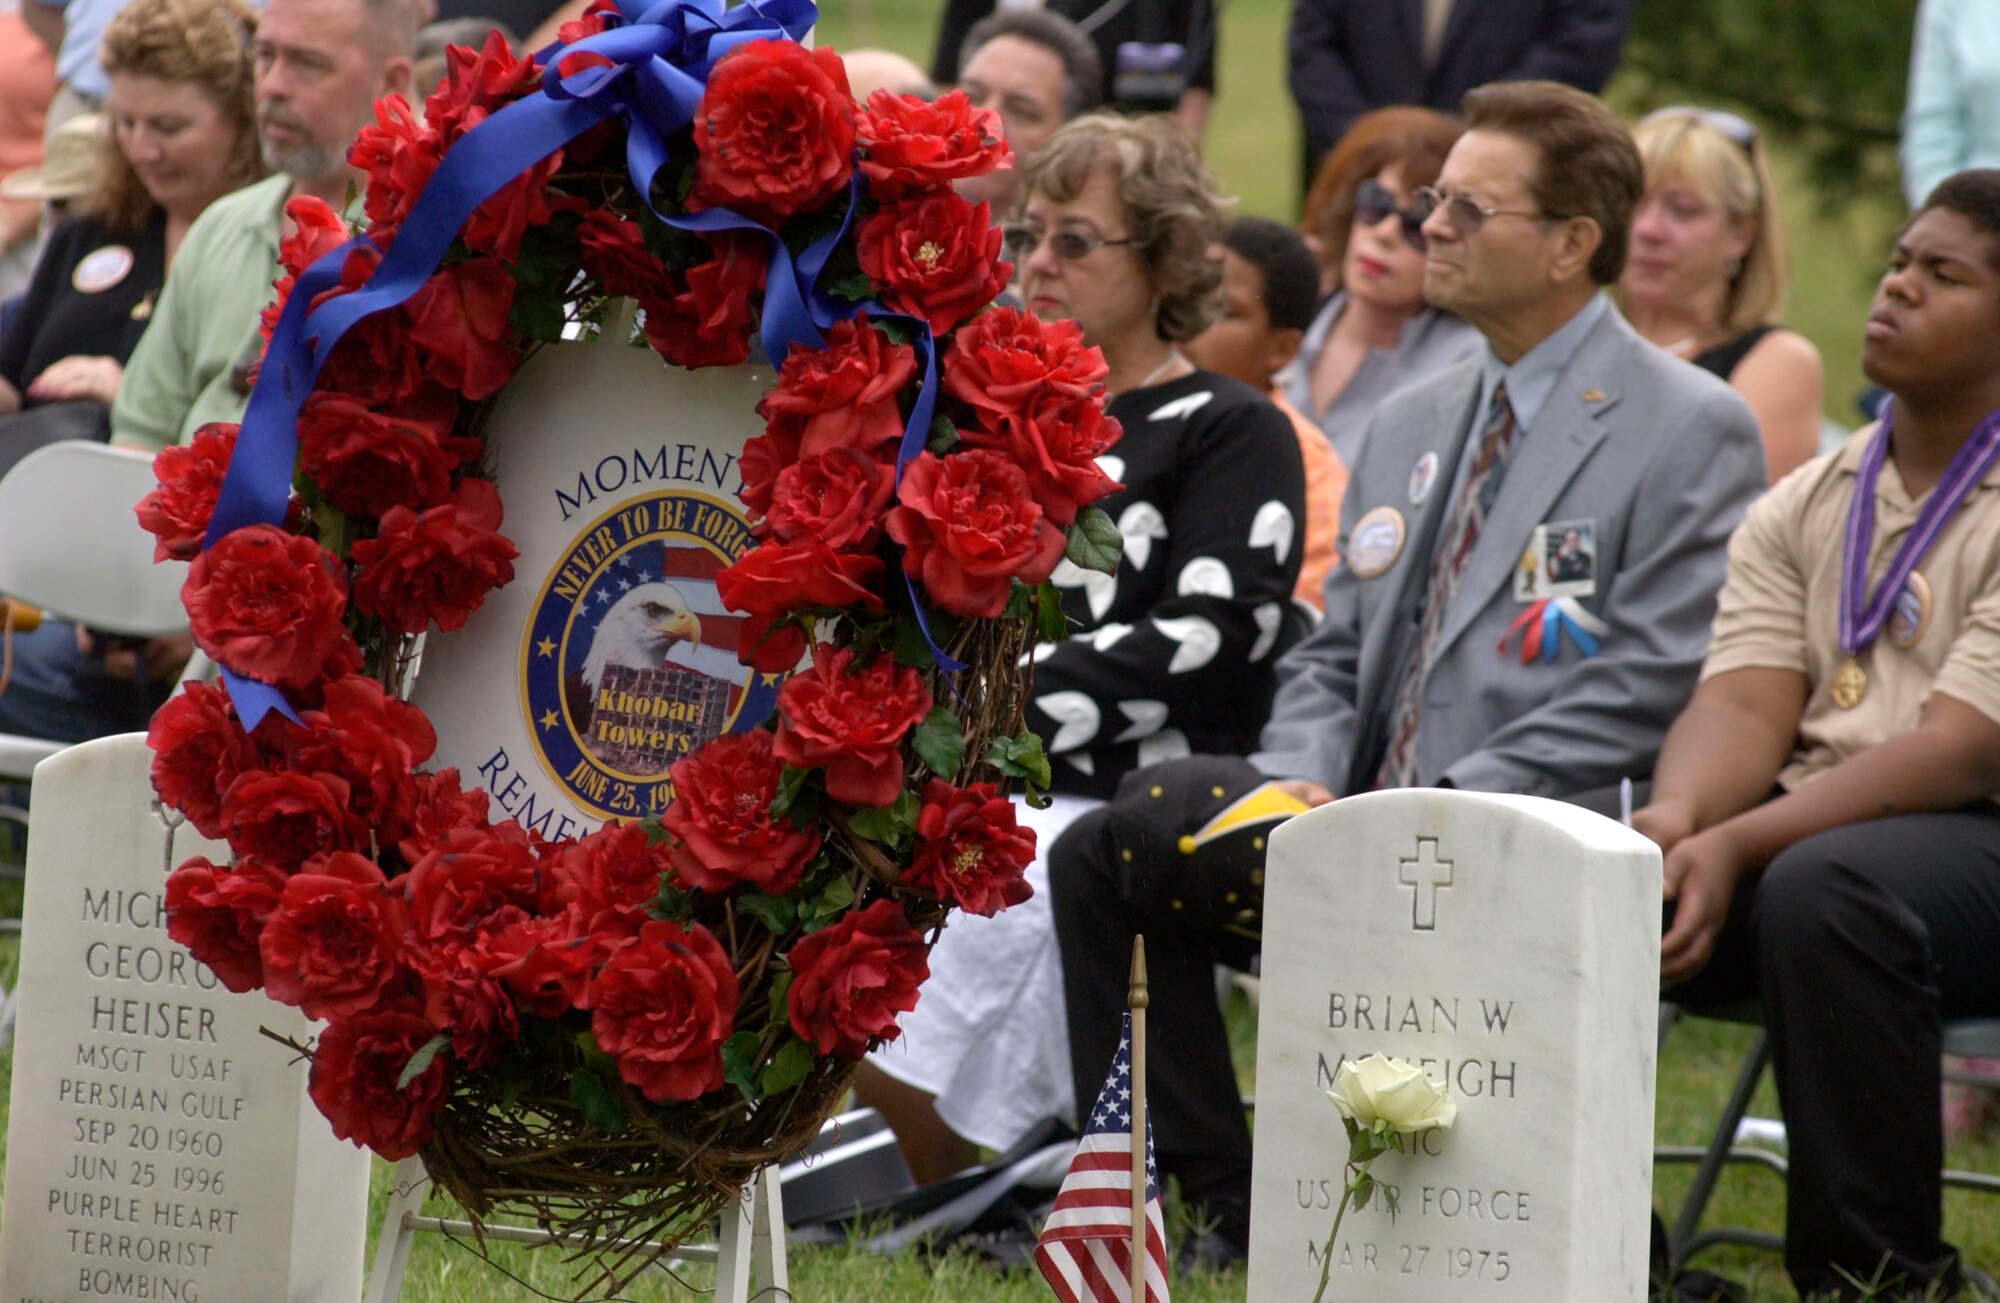 A wreath stands between the headstones of Master Sgt. Michael George Heiser and Airman 1st Class Brian W. McVeigh during the remembrance ceremony for the Khobar Towers bombing on Sunday, June 25, at Arlington National Cemetery, Va. The two were among 19 Airmen killed on June 25, 1996, in the terrorist bombing at Dhahran Air Base, Saudi Arabia.  Family members and friends of the Airmen killed in the terrorist bombing gathered for the ceremony.   (U.S. Air Force photo/Tech. Sgt. Cohen A. Young) 